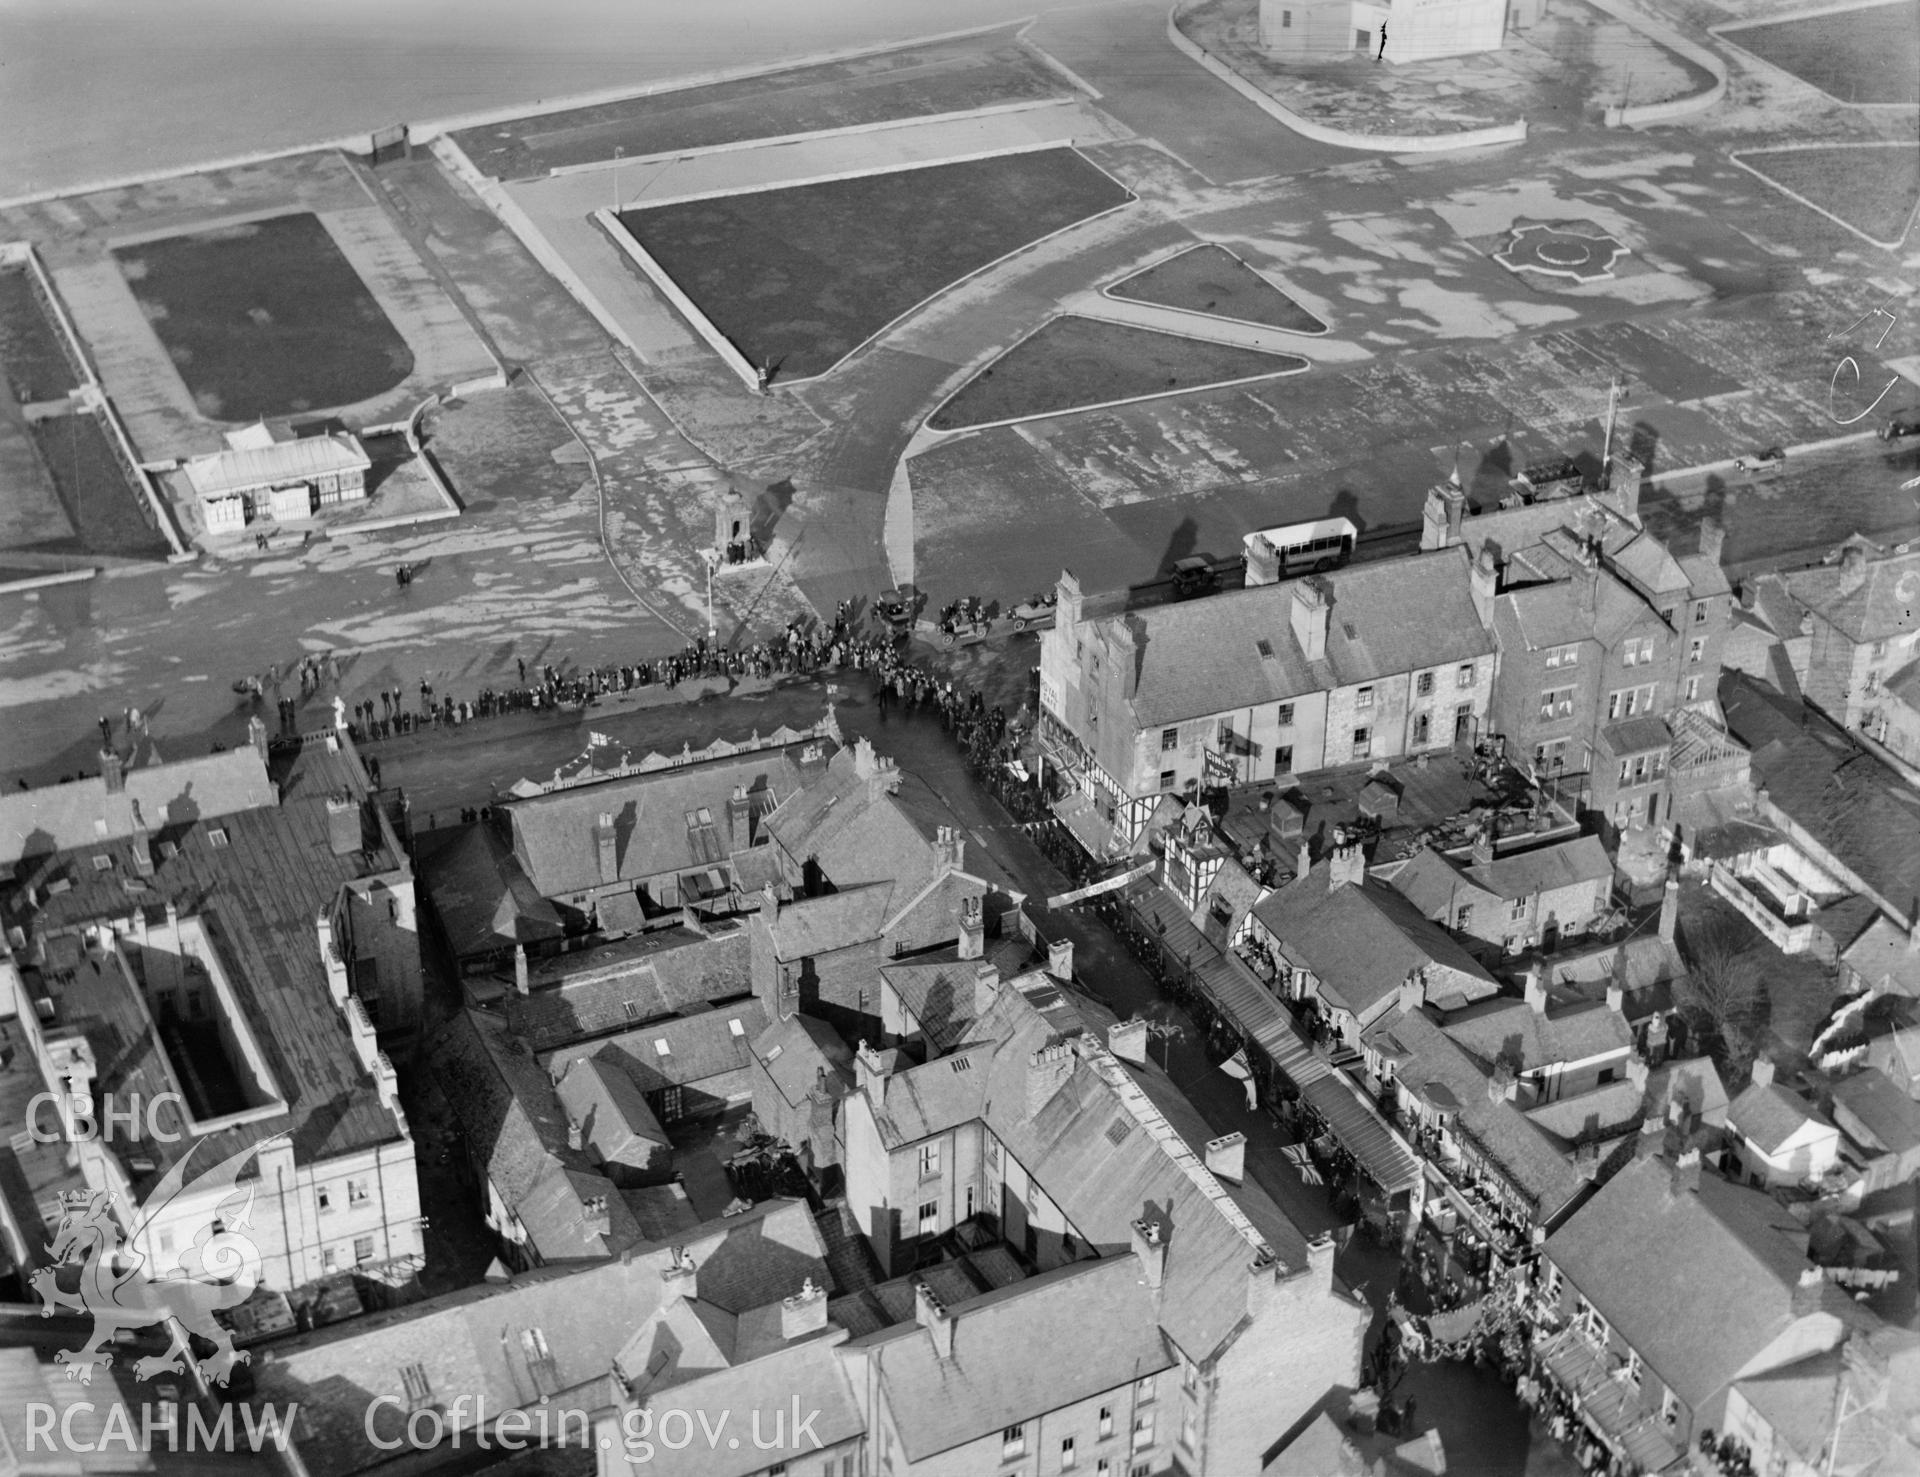 Rhyl showing war memorial and crowds during the November vist by the Prince of Wales (later Edward VIII), oblique aerial view. 5?x4? black and white glass plate negative.